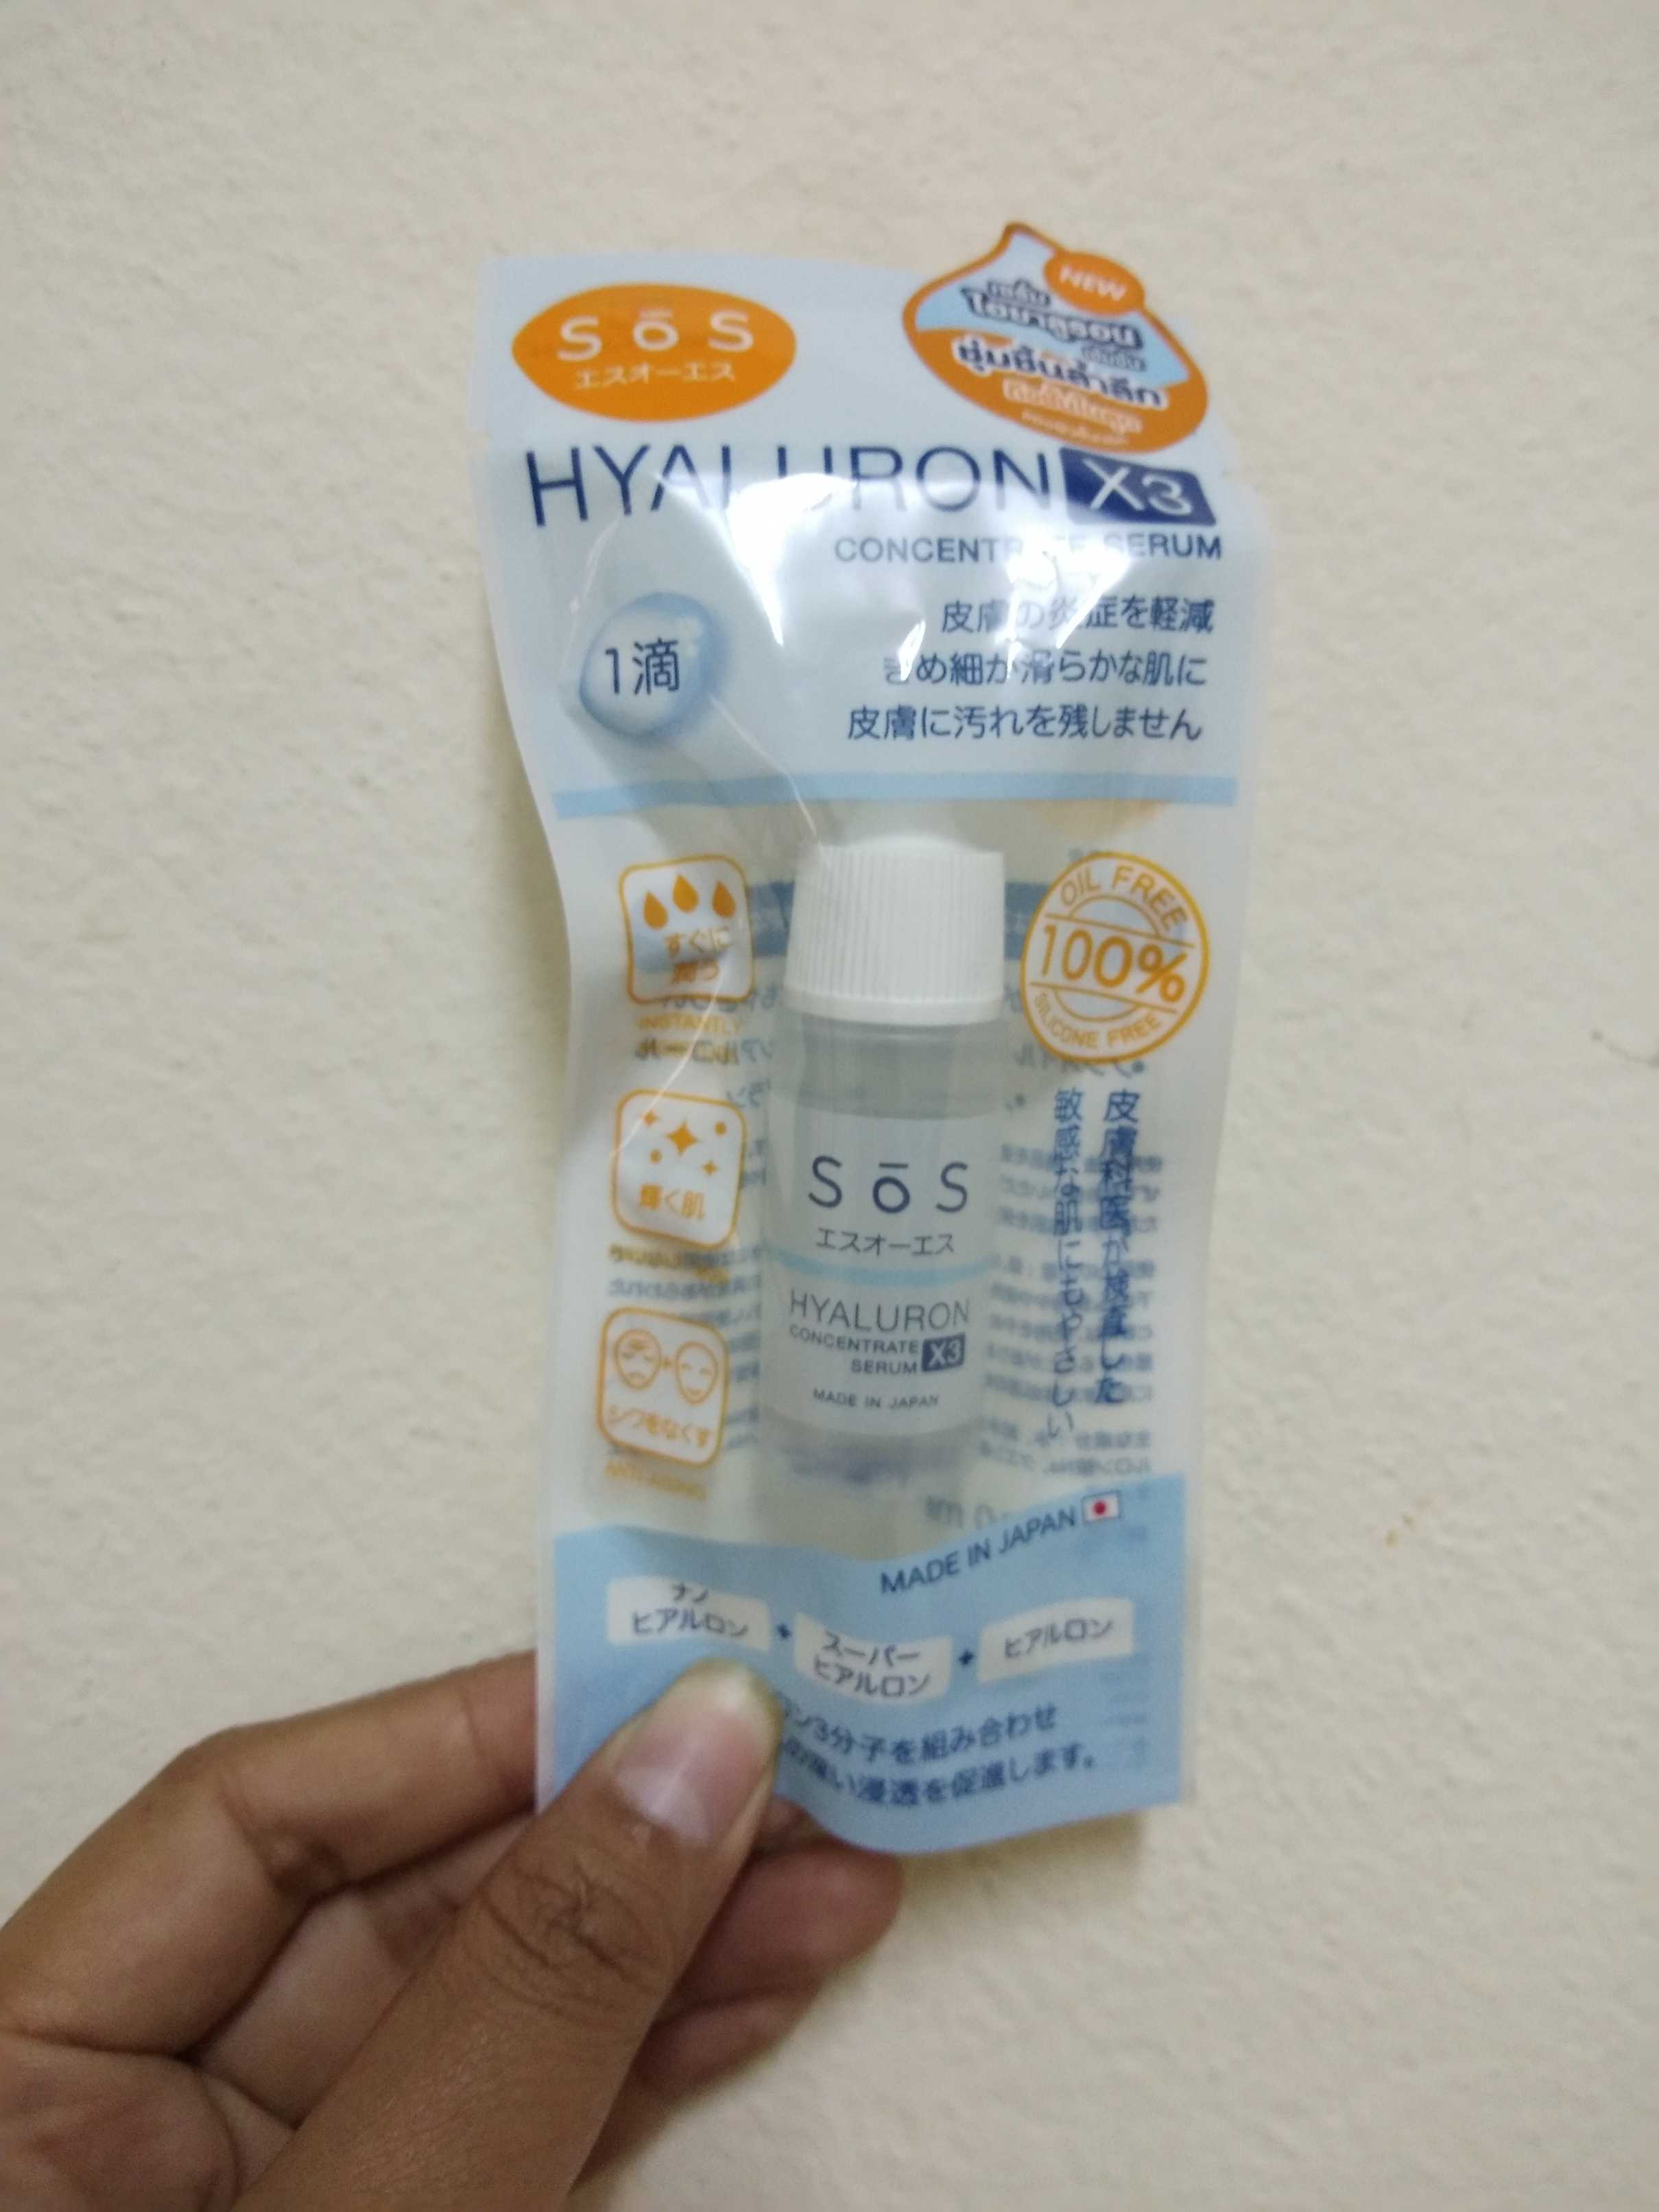 SOS Hyaluron X3 Concentrate Serum